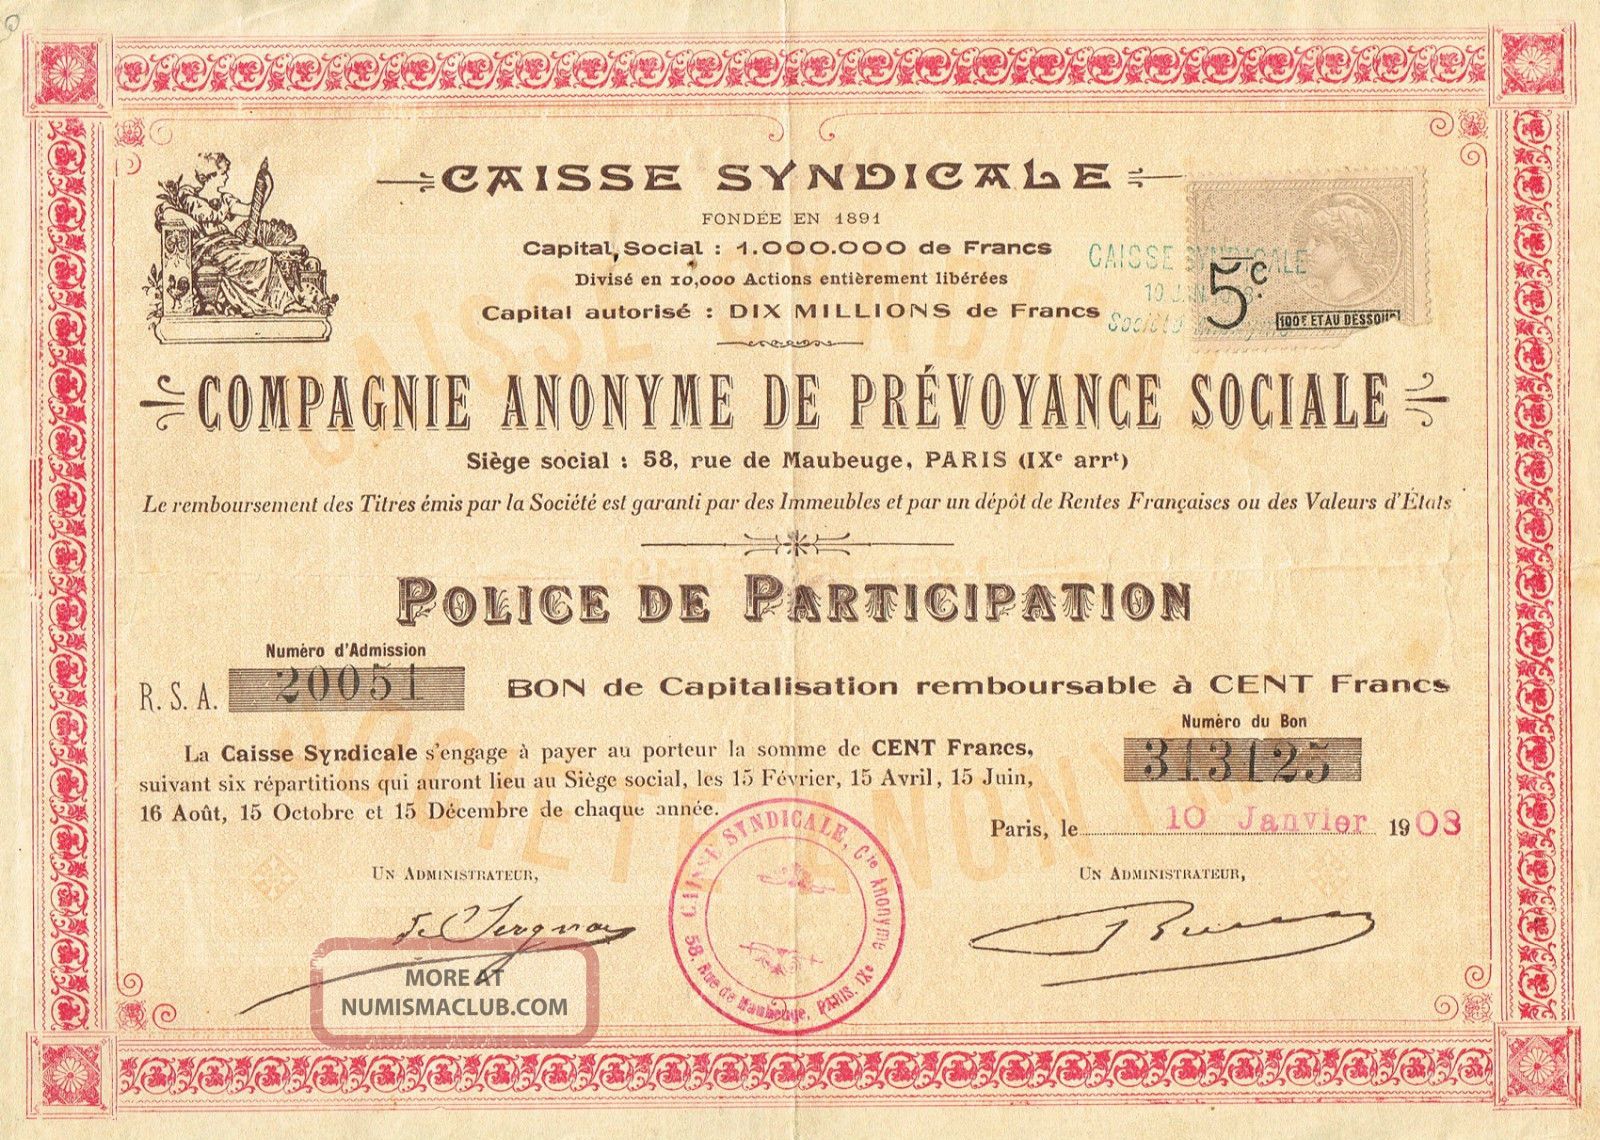 France Social Security Stock Certificate 1903 World photo